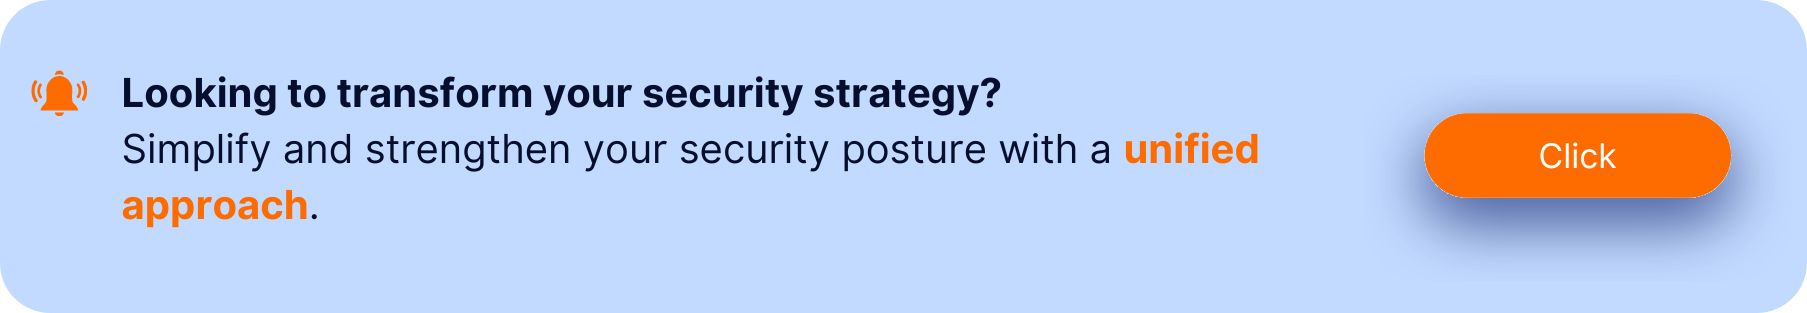 Banner with a notification icon and the text: "Looking to transform your security strategy? Simplify and strengthen your security posture with a unified approach." A prominent orange "Click" button is on the right side.